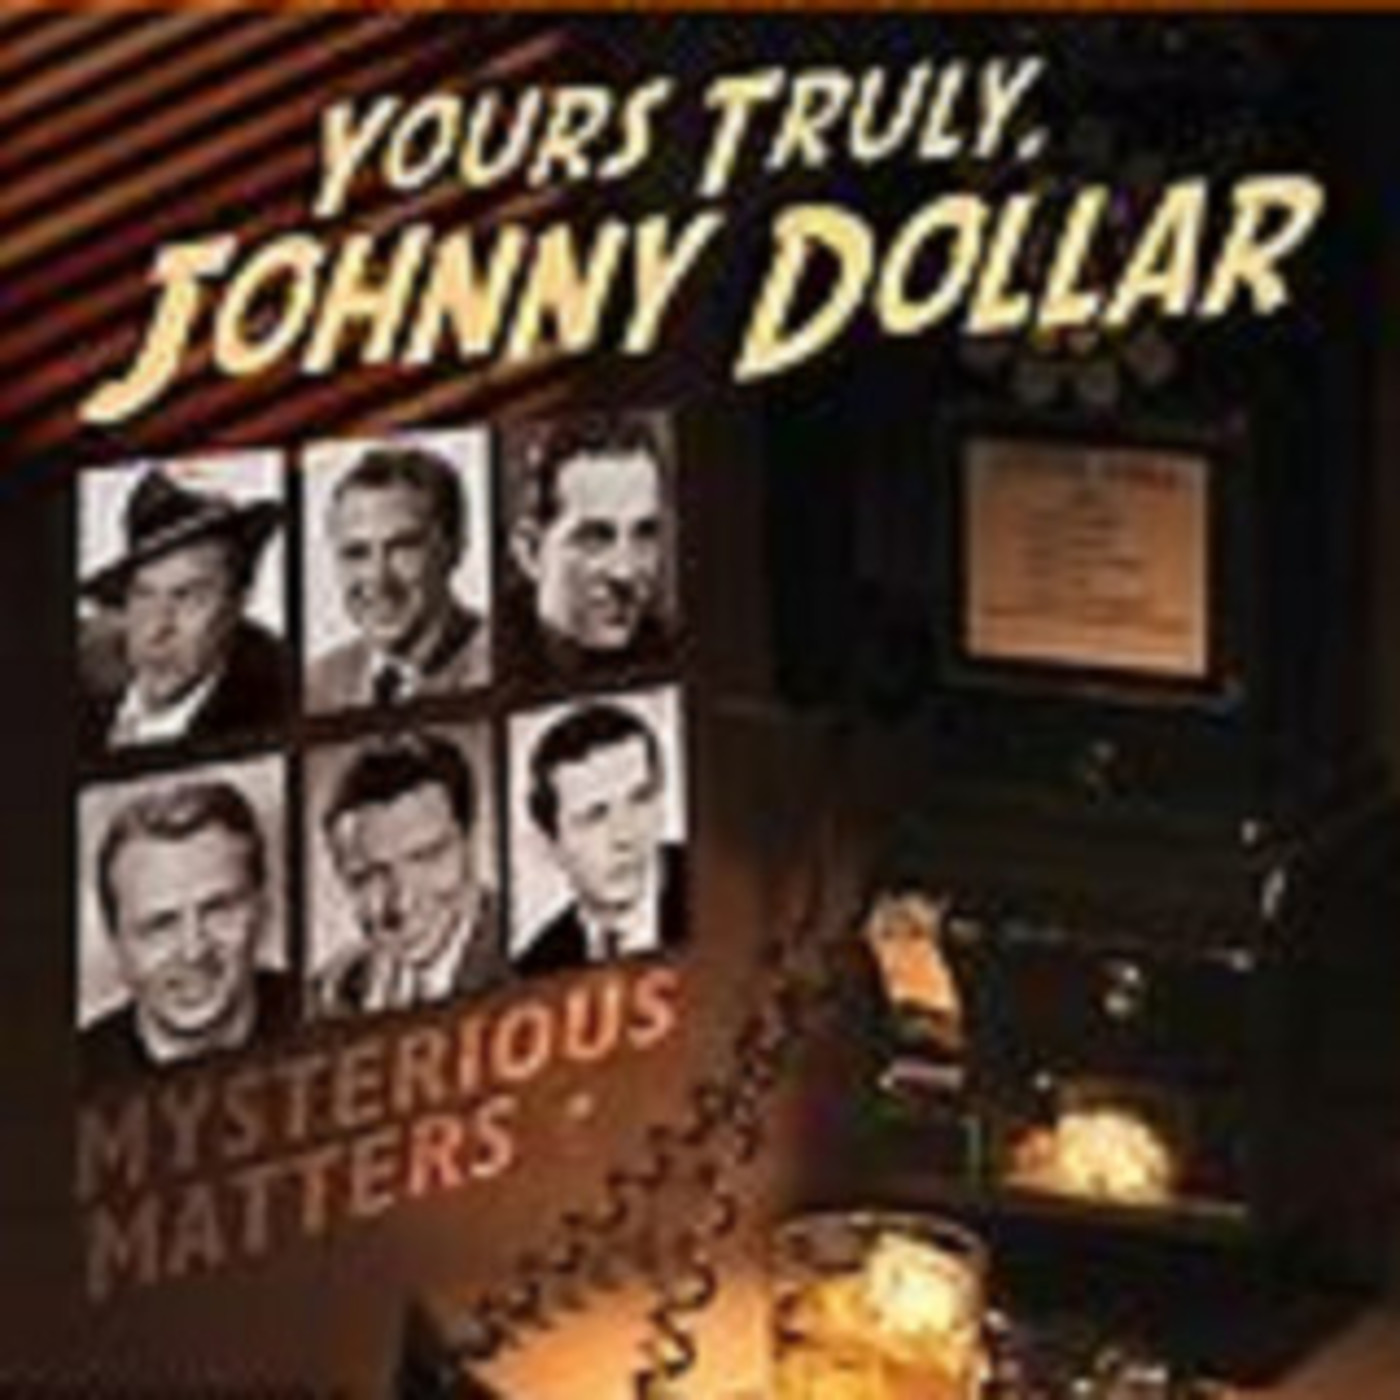 Yours Truly, Johnny Dollar - 090962, episode 808 - The Four Cs Matter